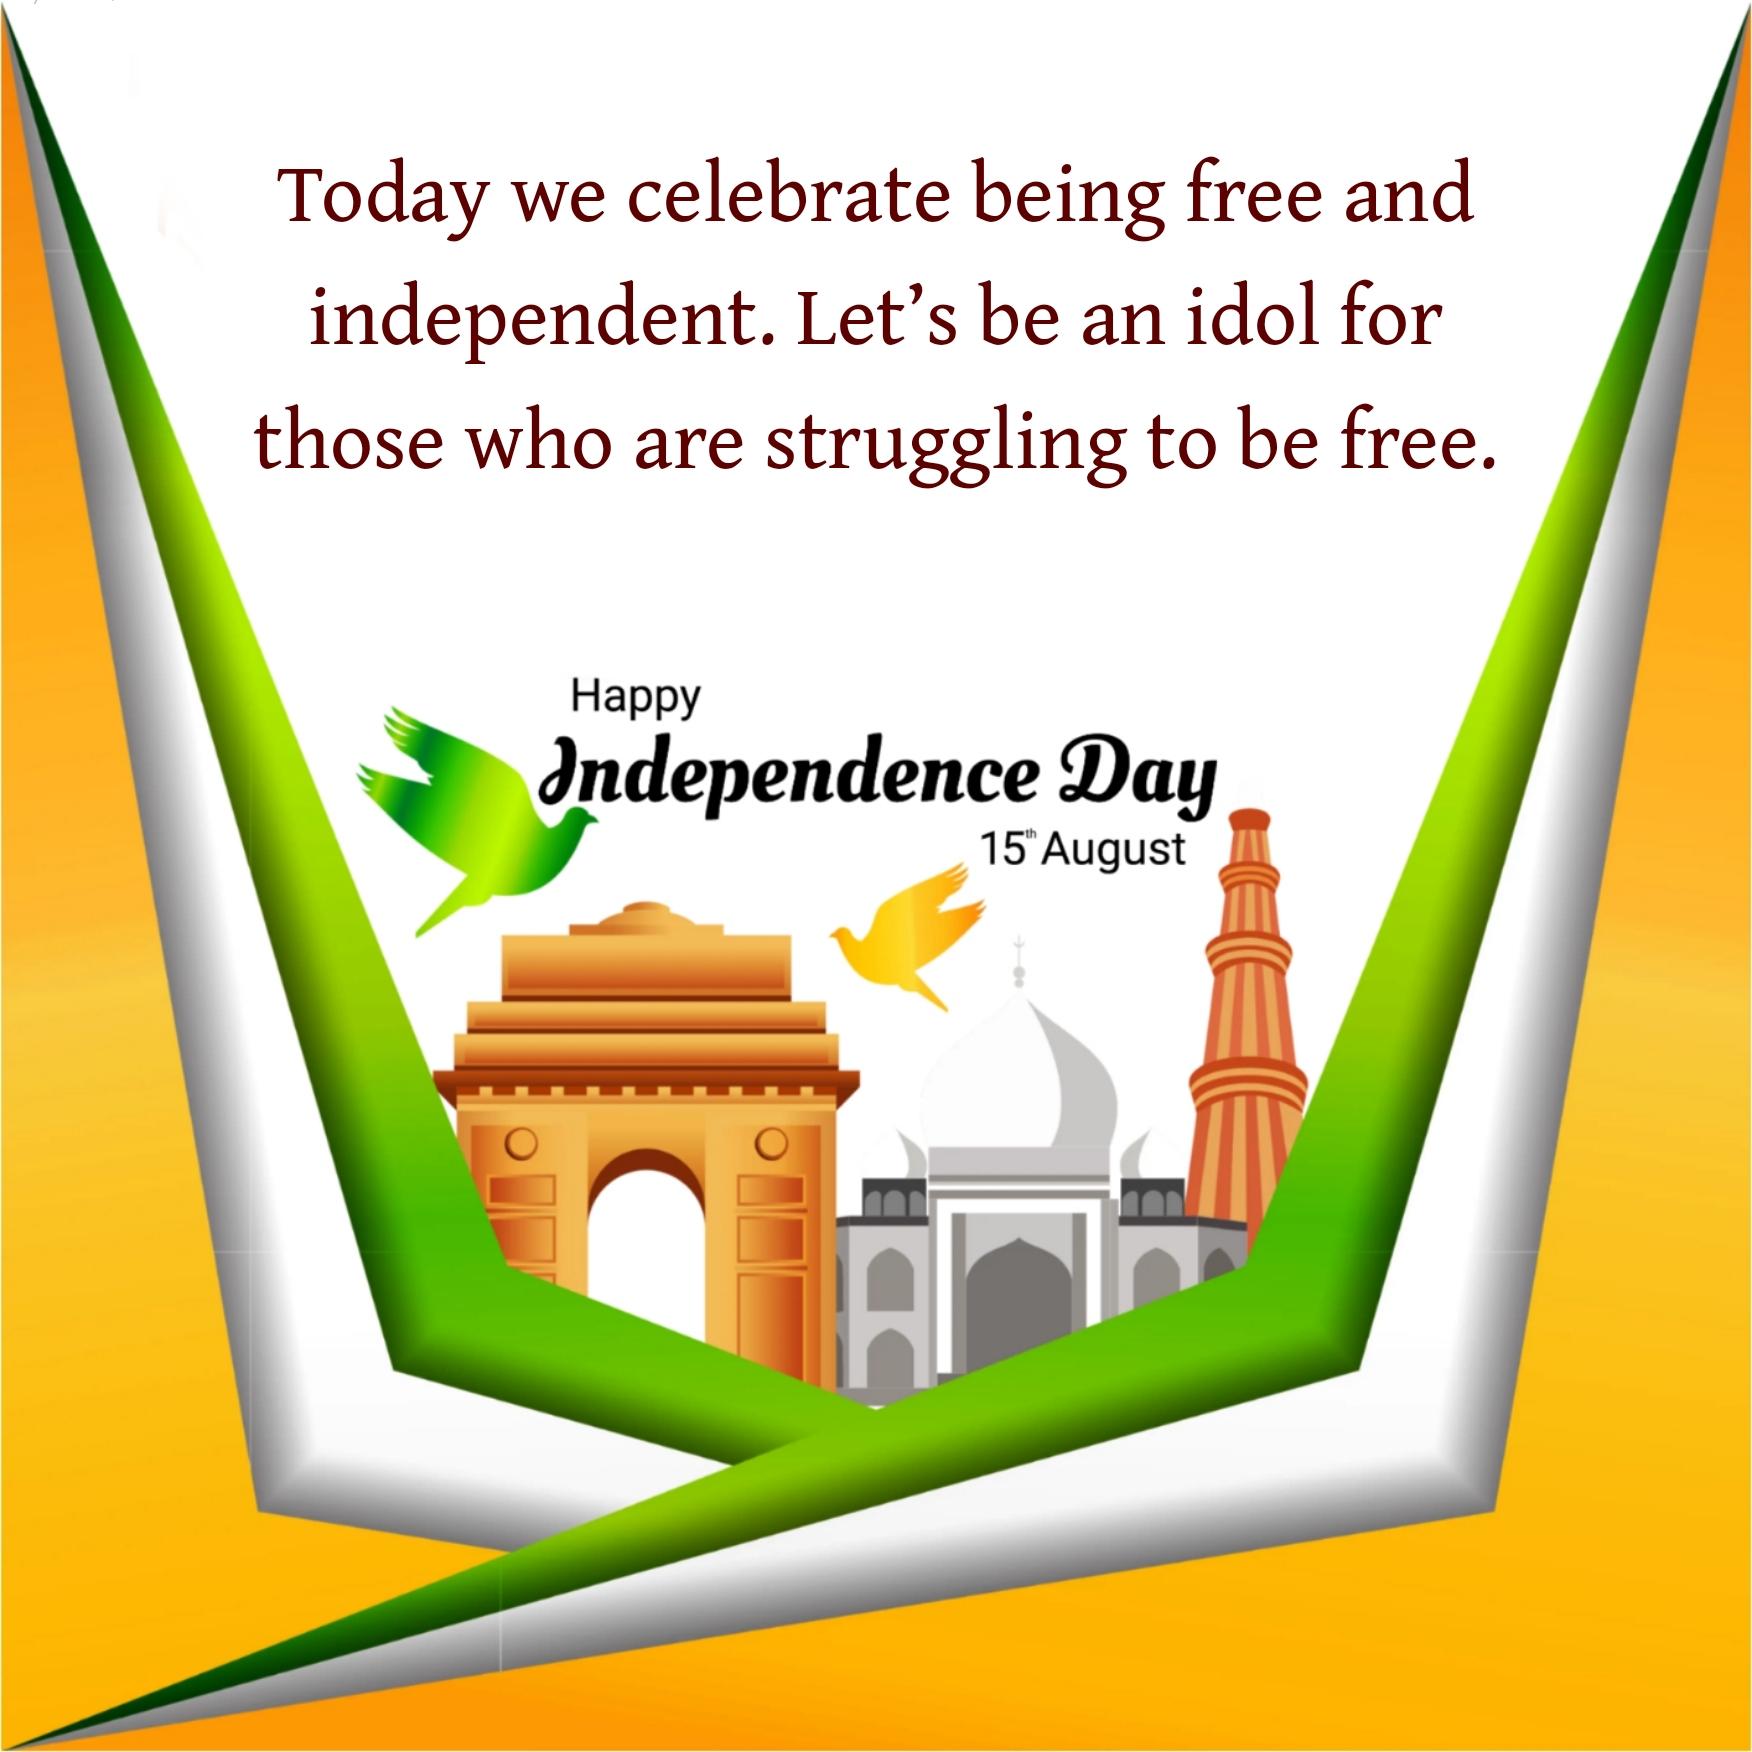 Today we celebrate being free and independent